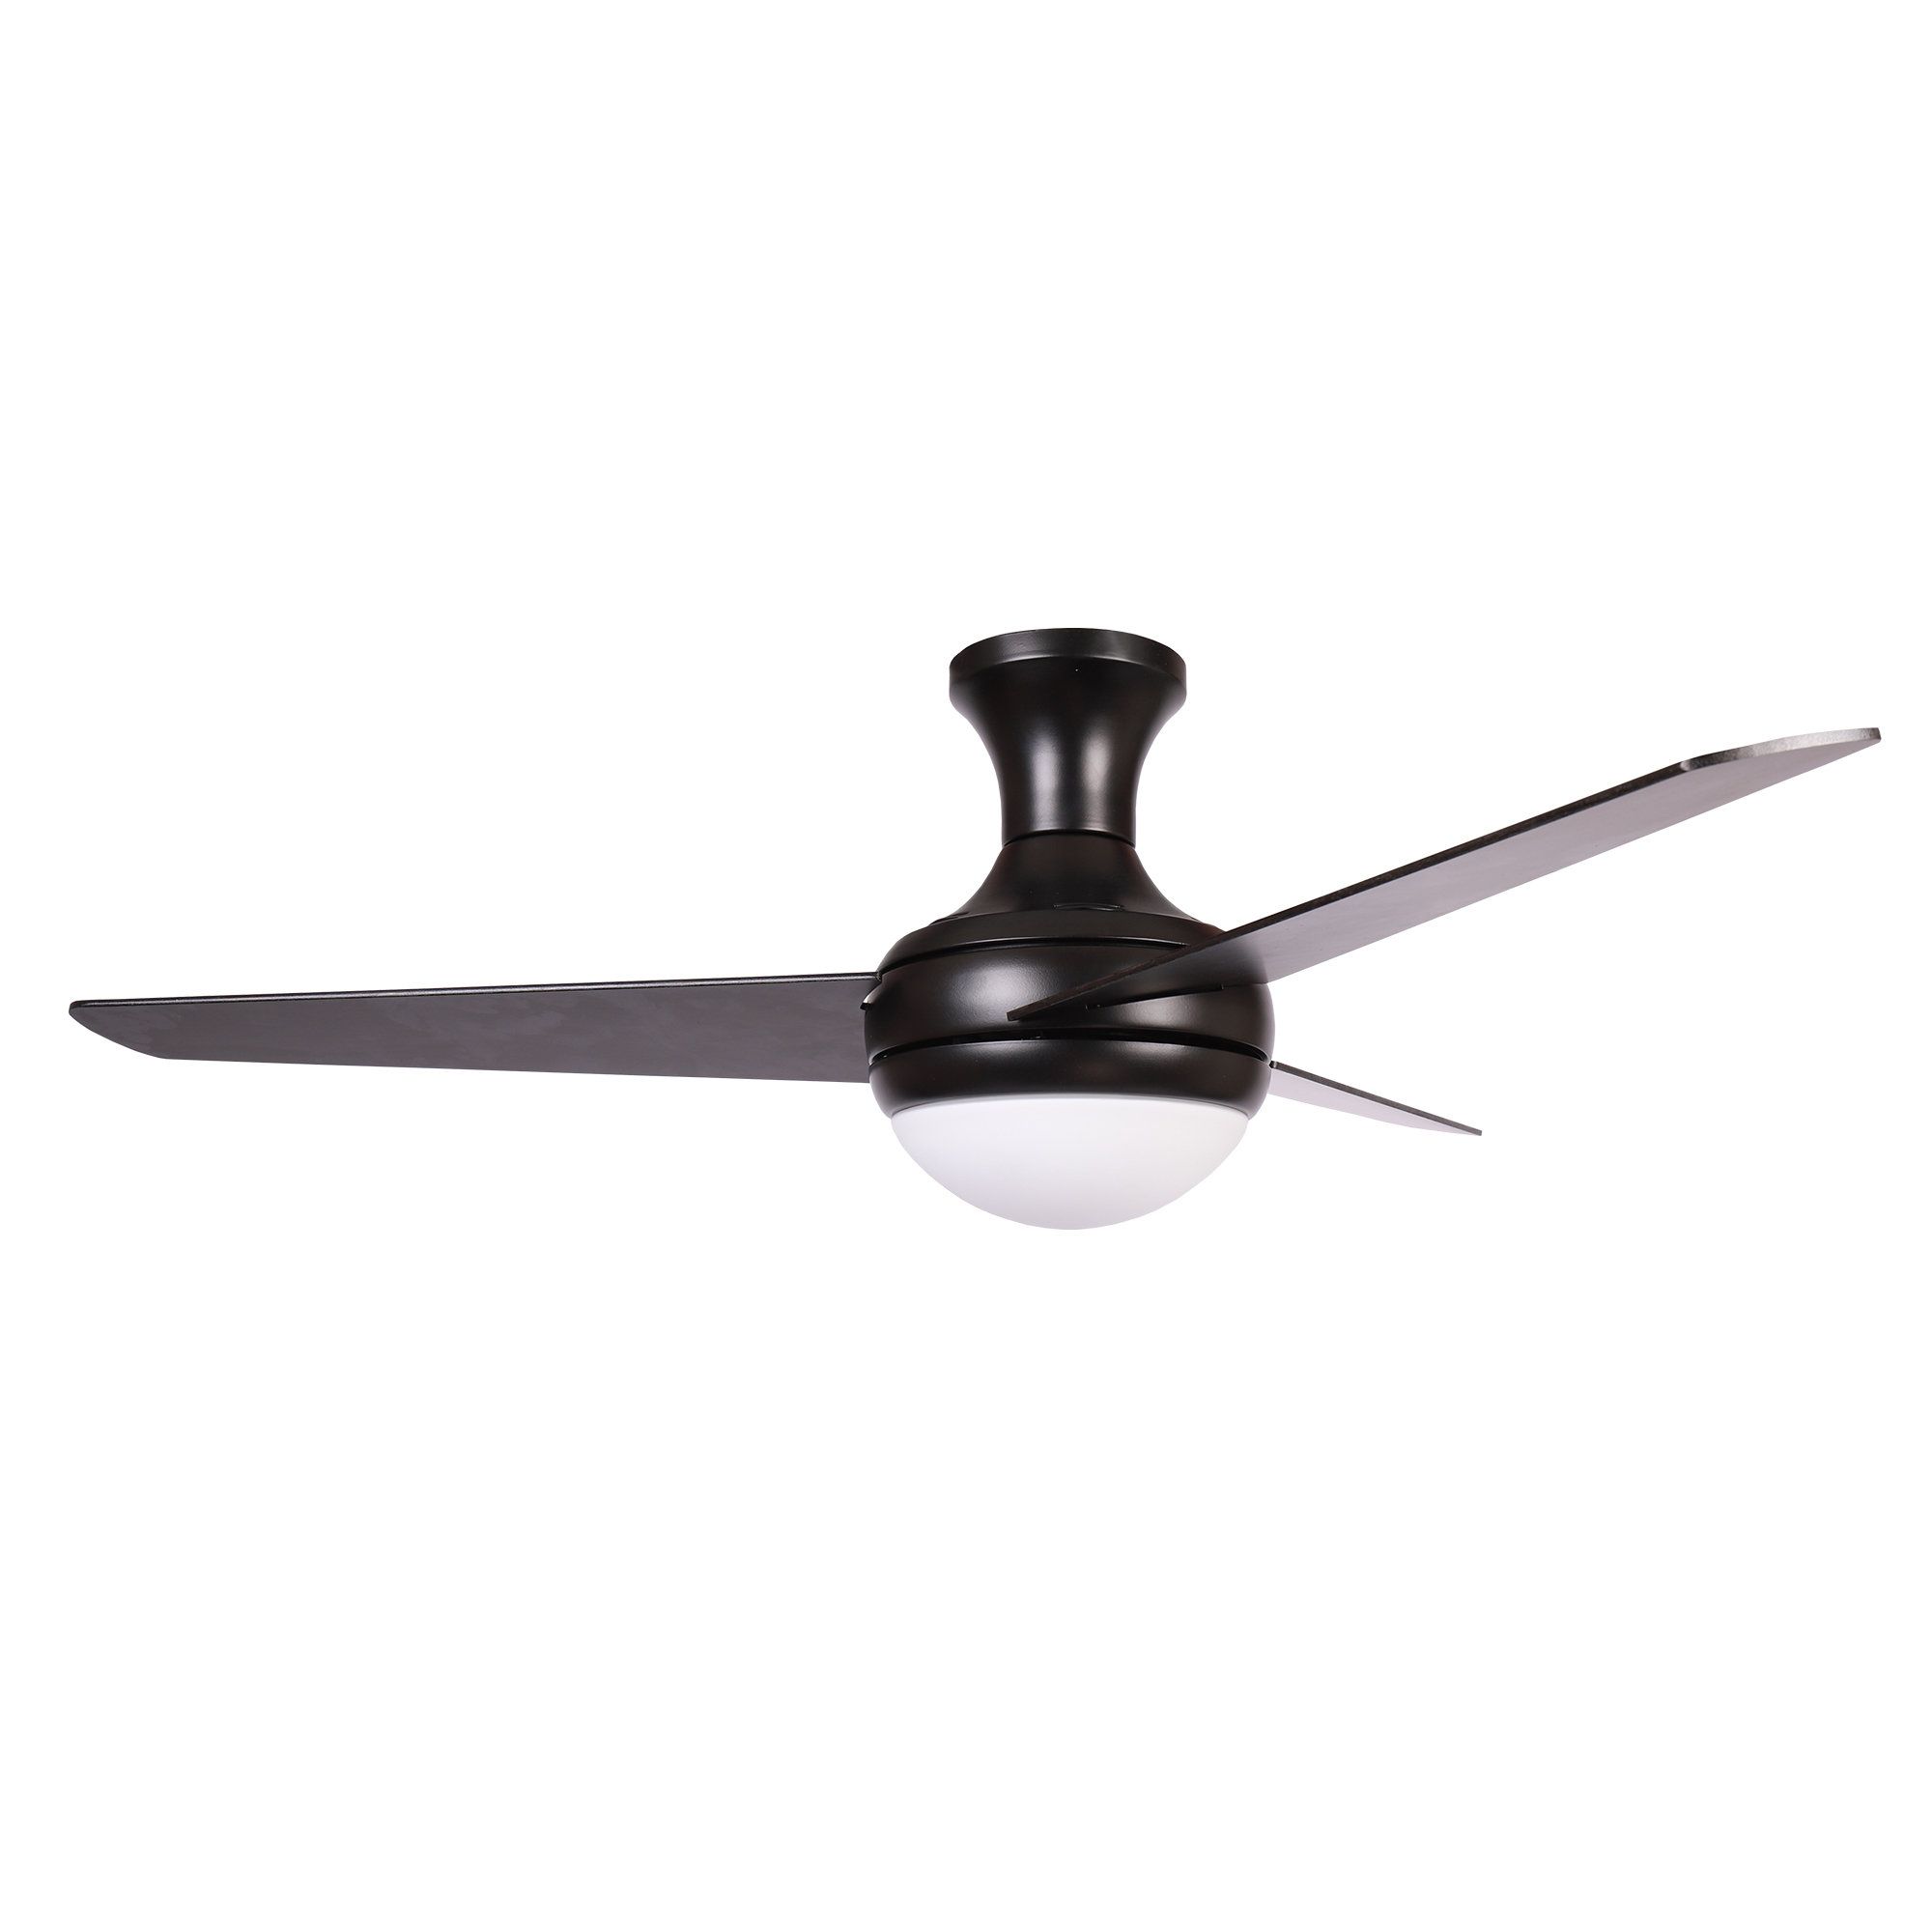 2019 48" Nikki 3 Blade Ceiling Fan With Remote, Light Kit Included With Regard To Nikki 3 Blade Ceiling Fans (Photo 1 of 20)